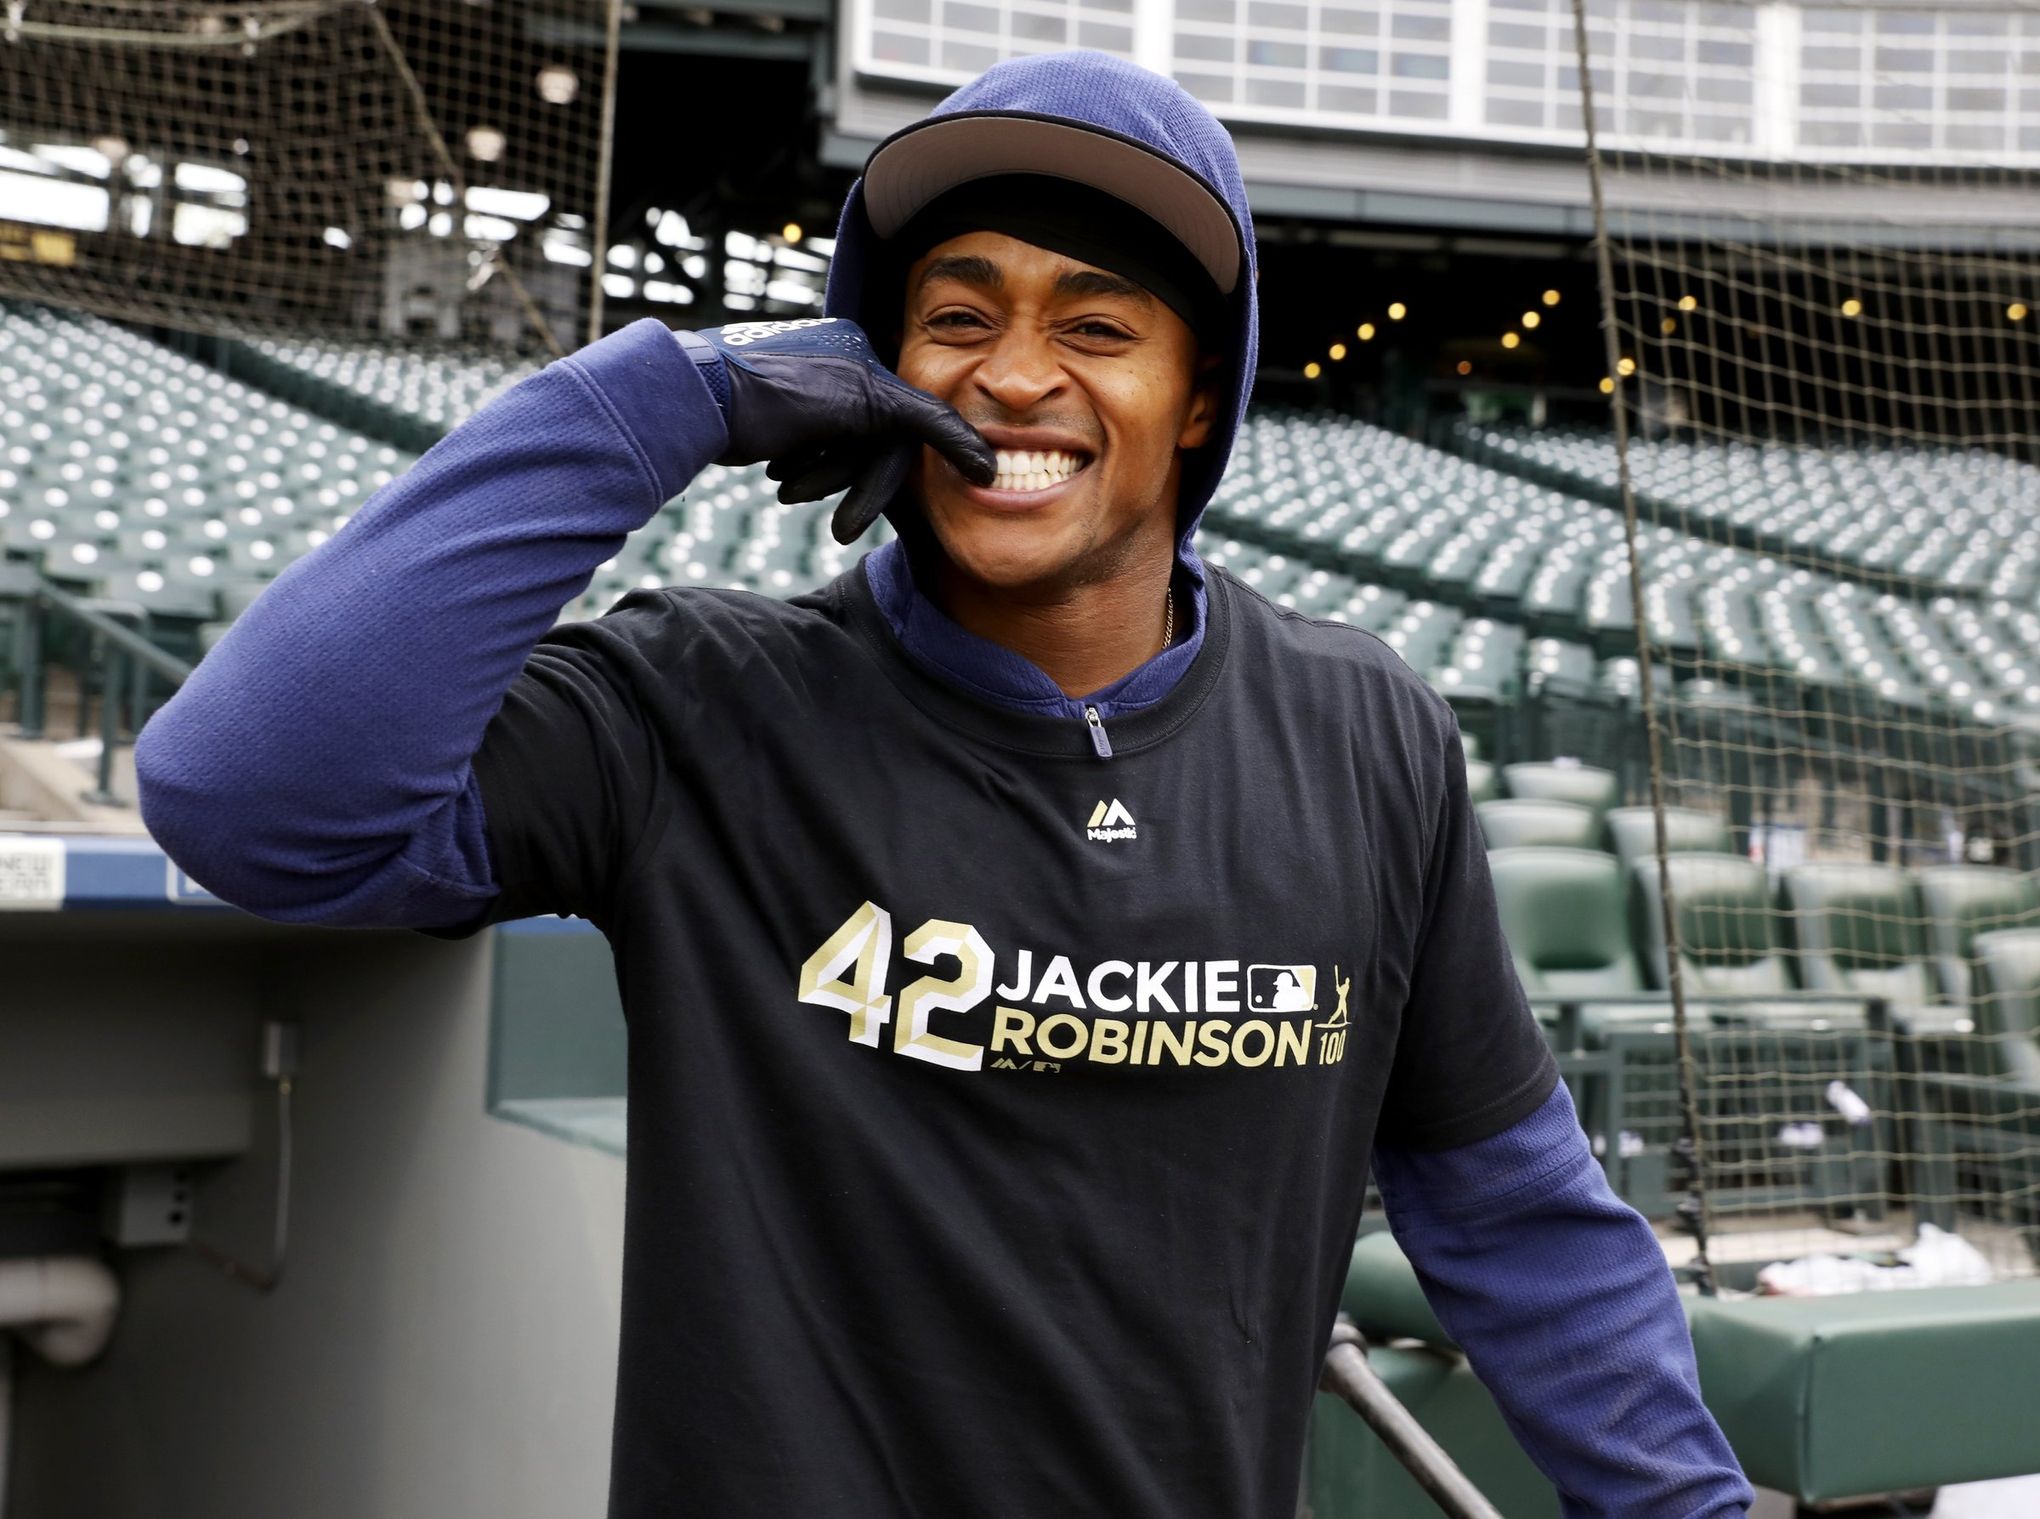 I think we making Jackie proud today': Mariners' Dee Gordon on